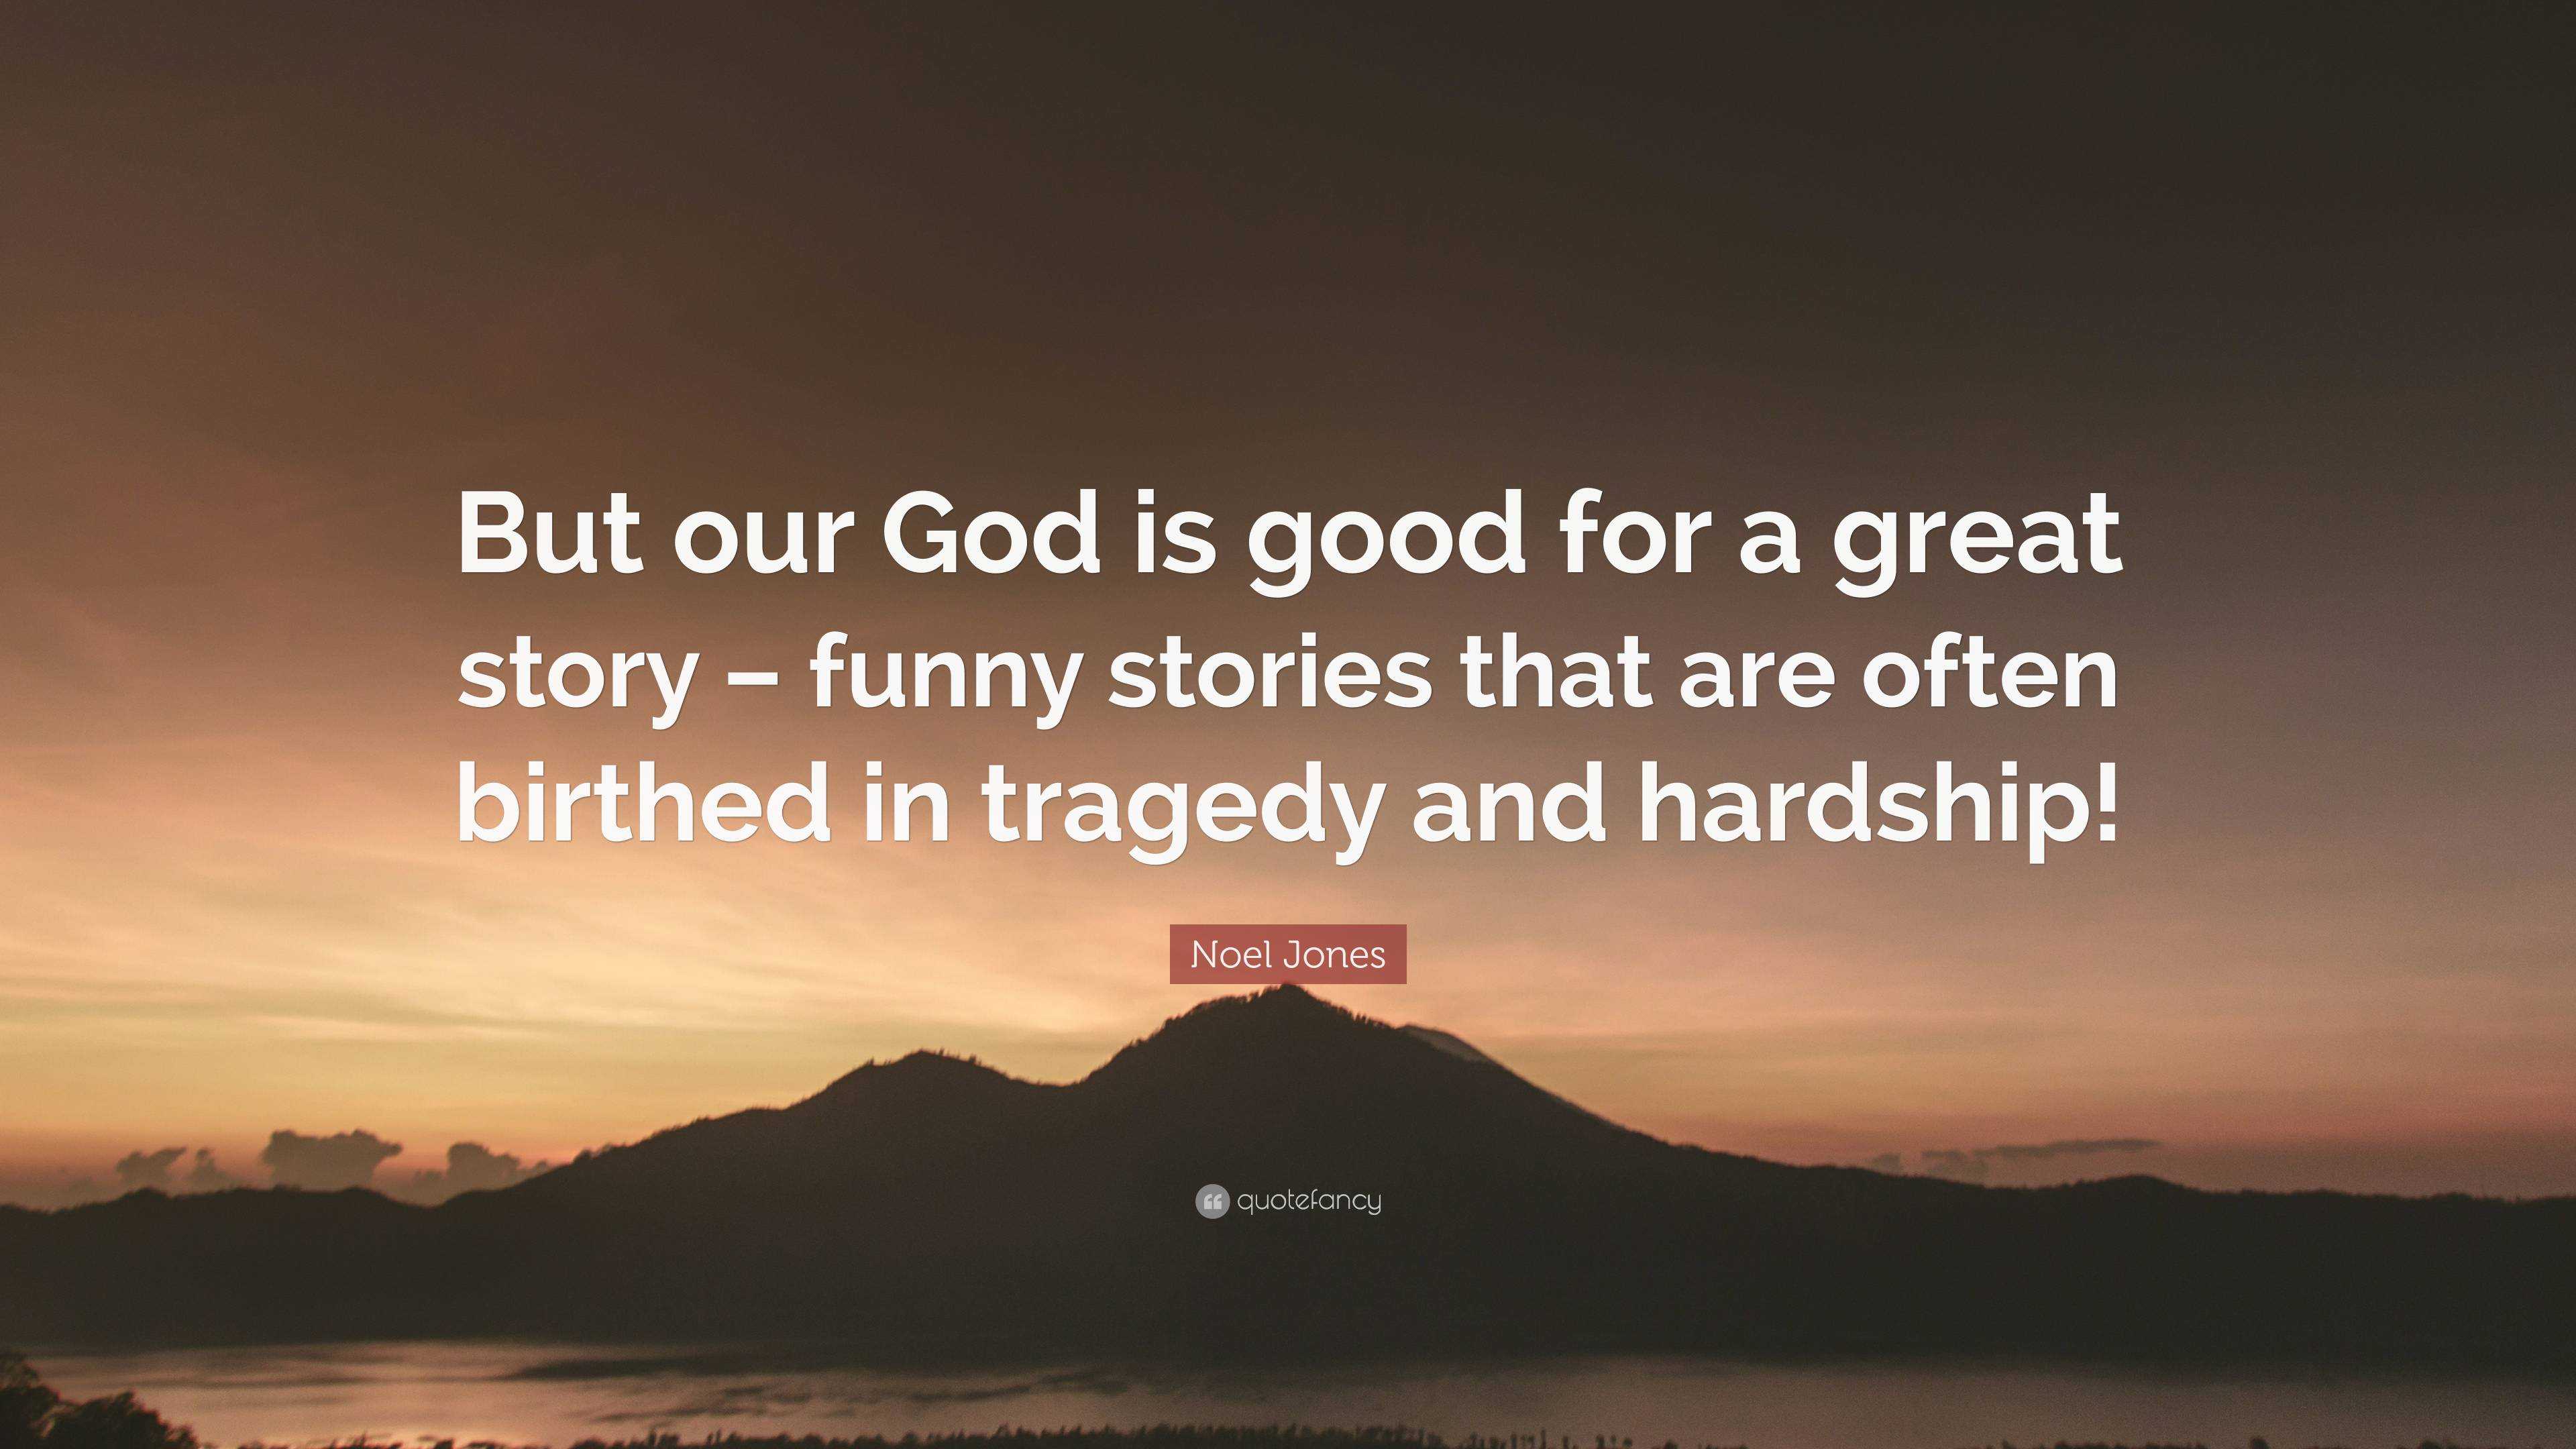 Noel Jones Quote: “But our God is good for a great story – funny stories  that are